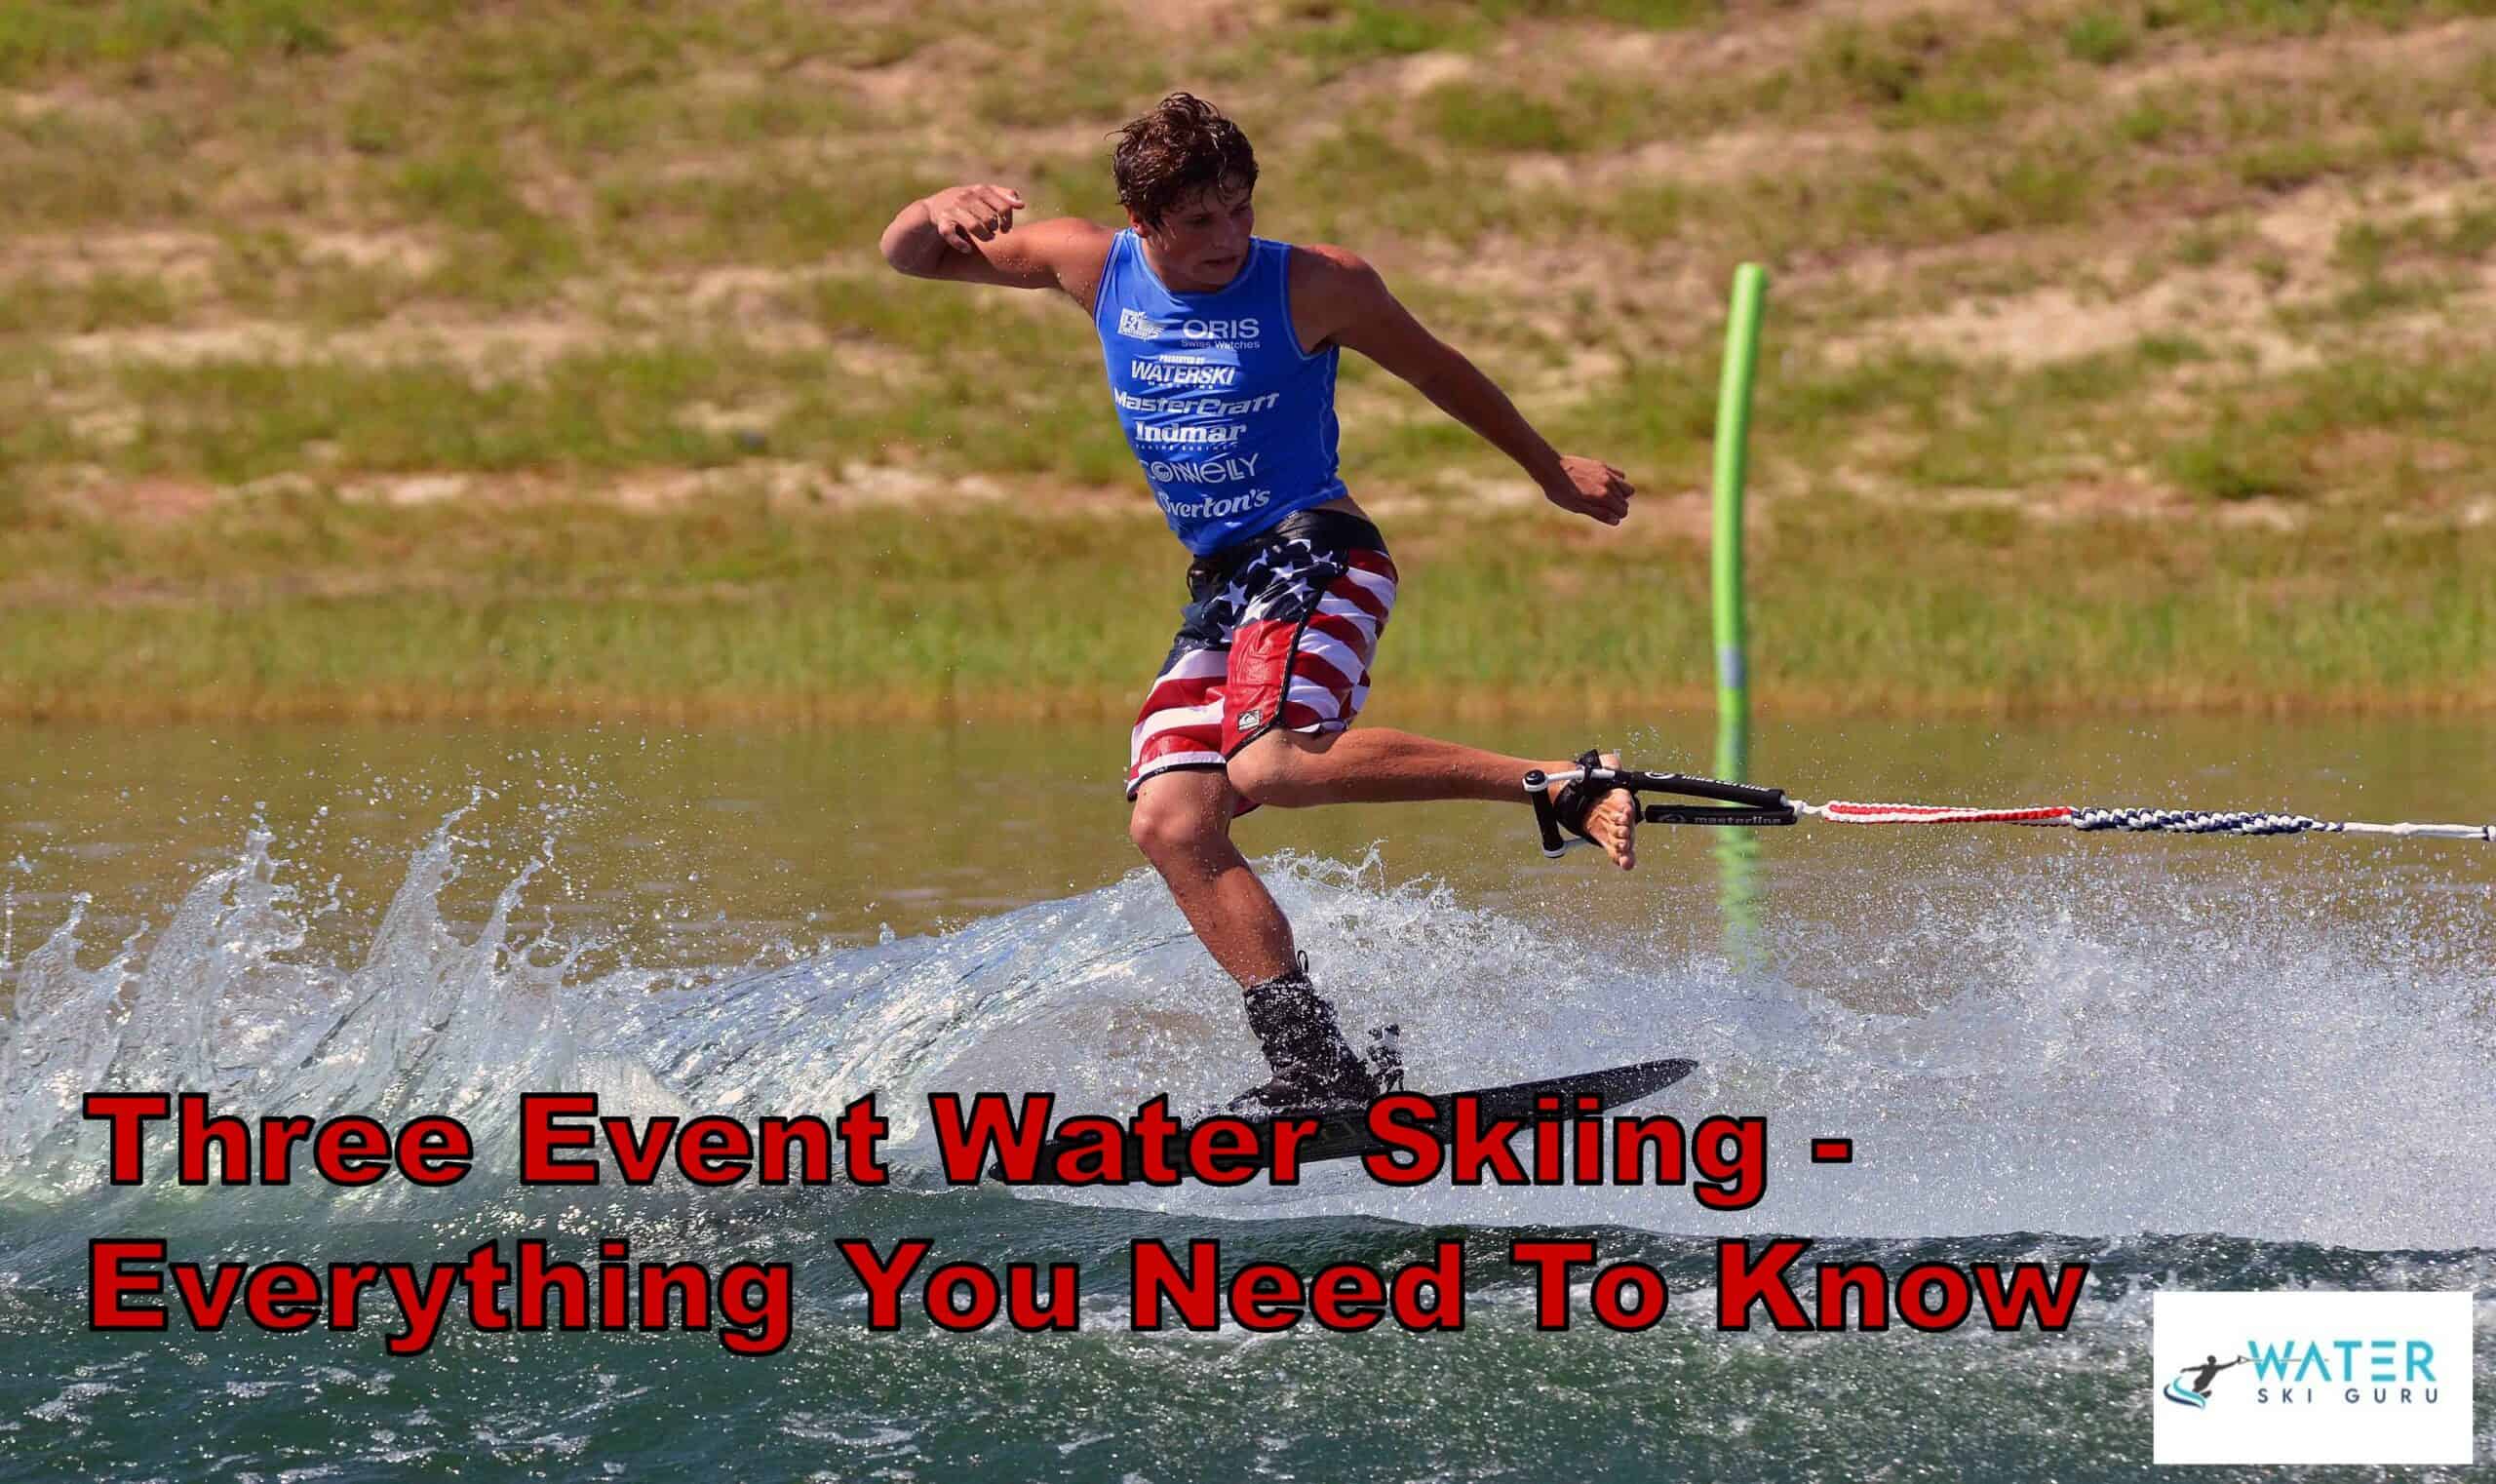 Three Event Water Skiing - Everything You Need to Know